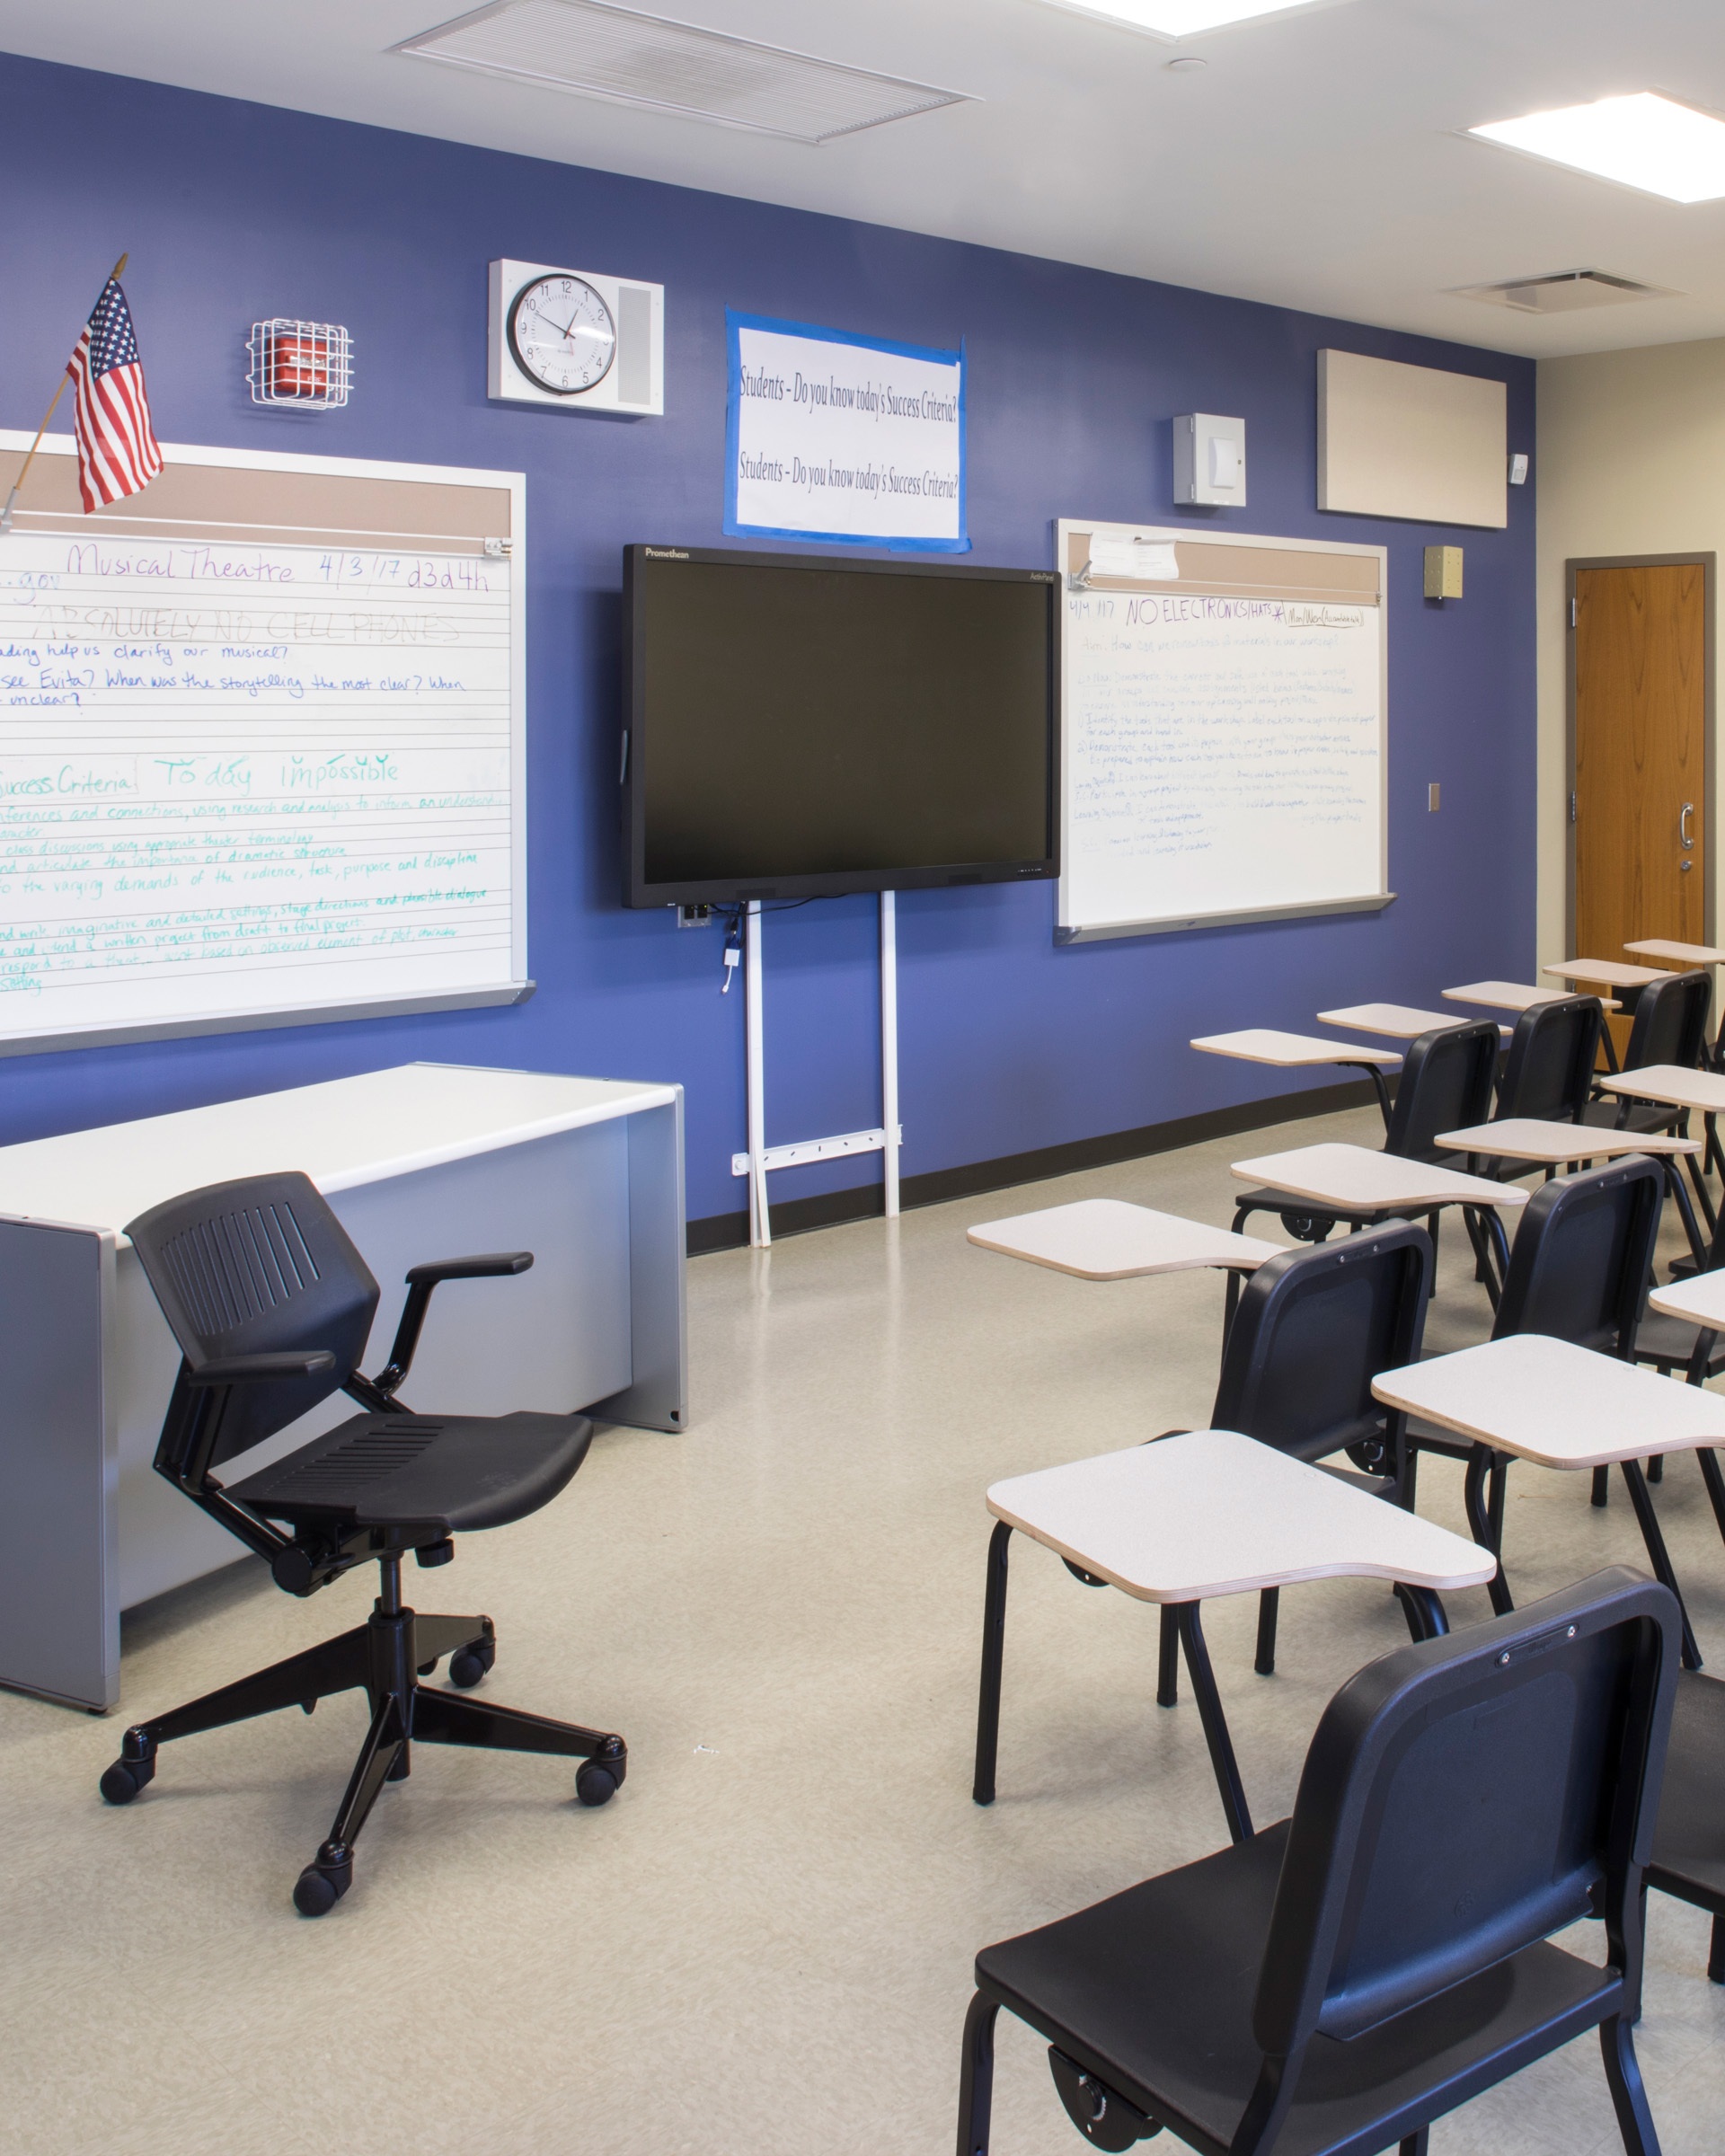 Classroom at the Susan E. Wagner High School Performing Arts Annex